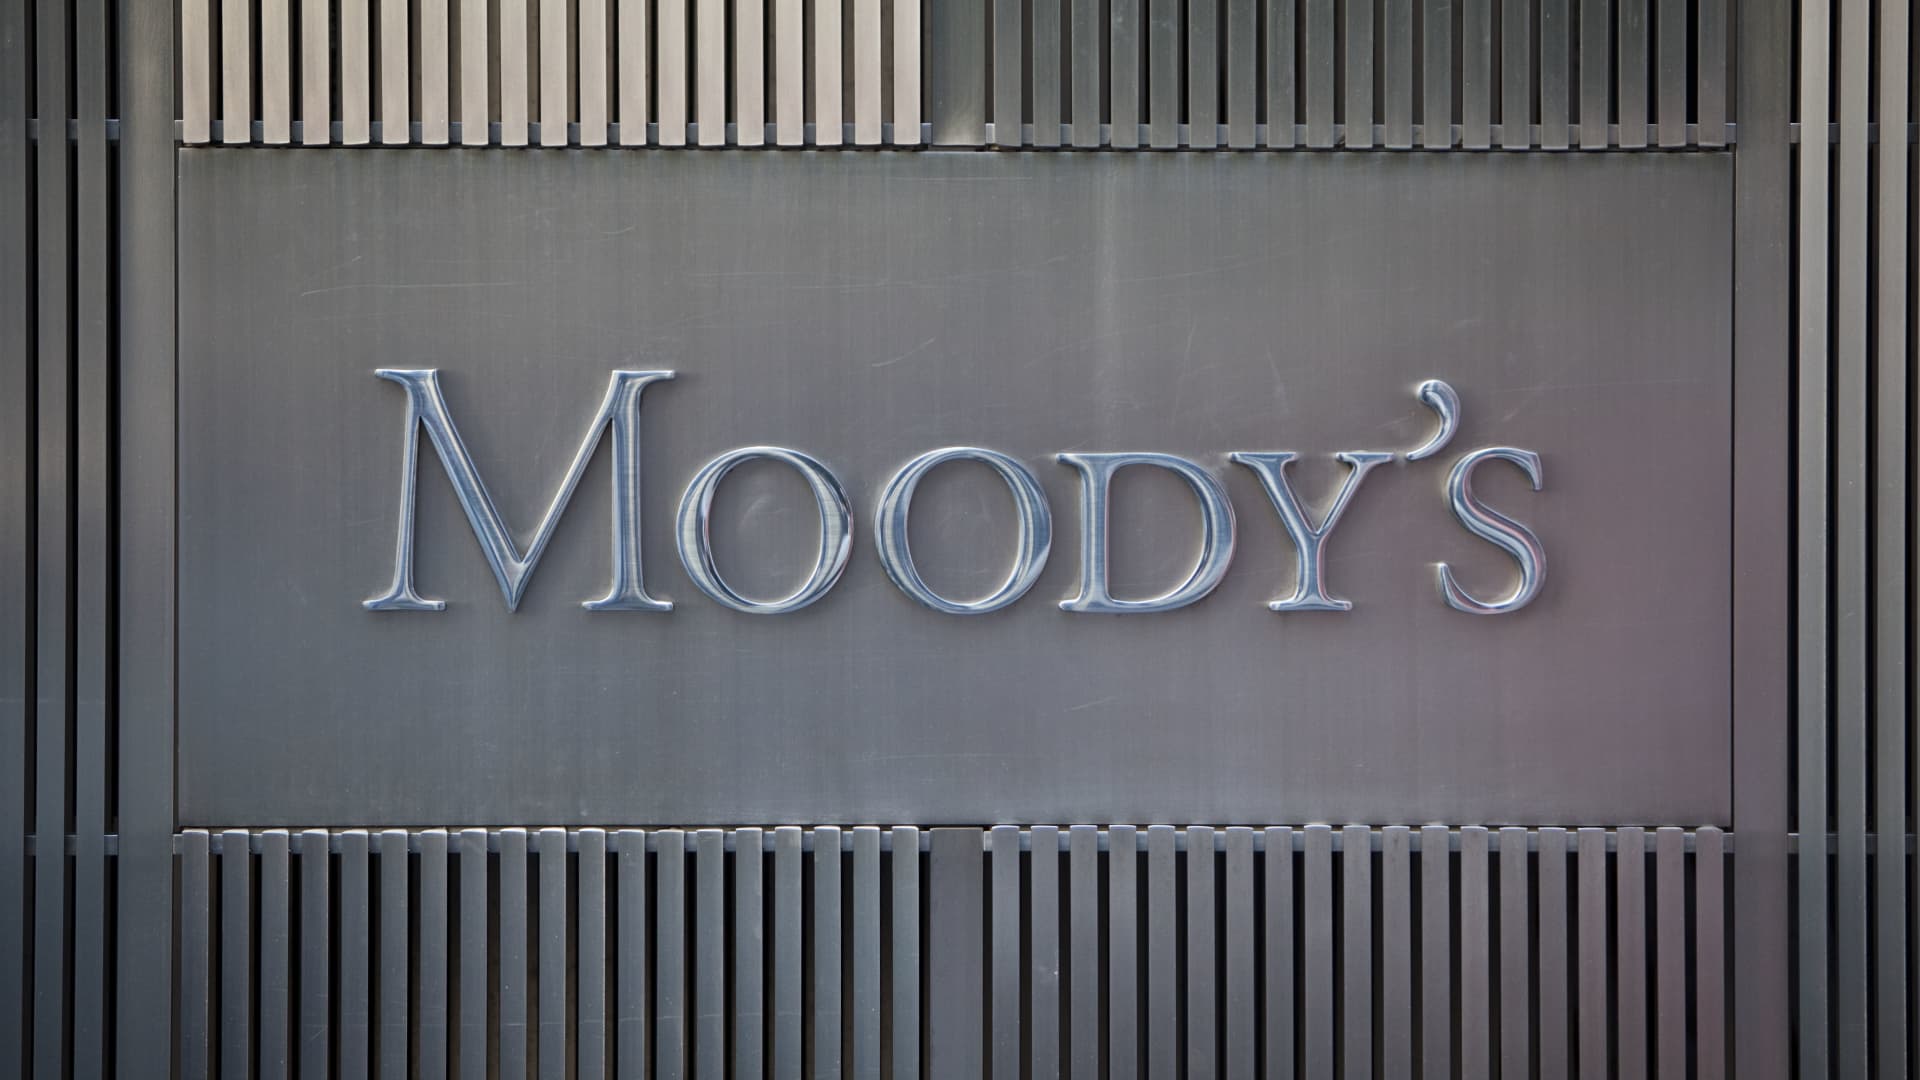 Previous Moody’s leading law firm pleads responsible in tax scenario